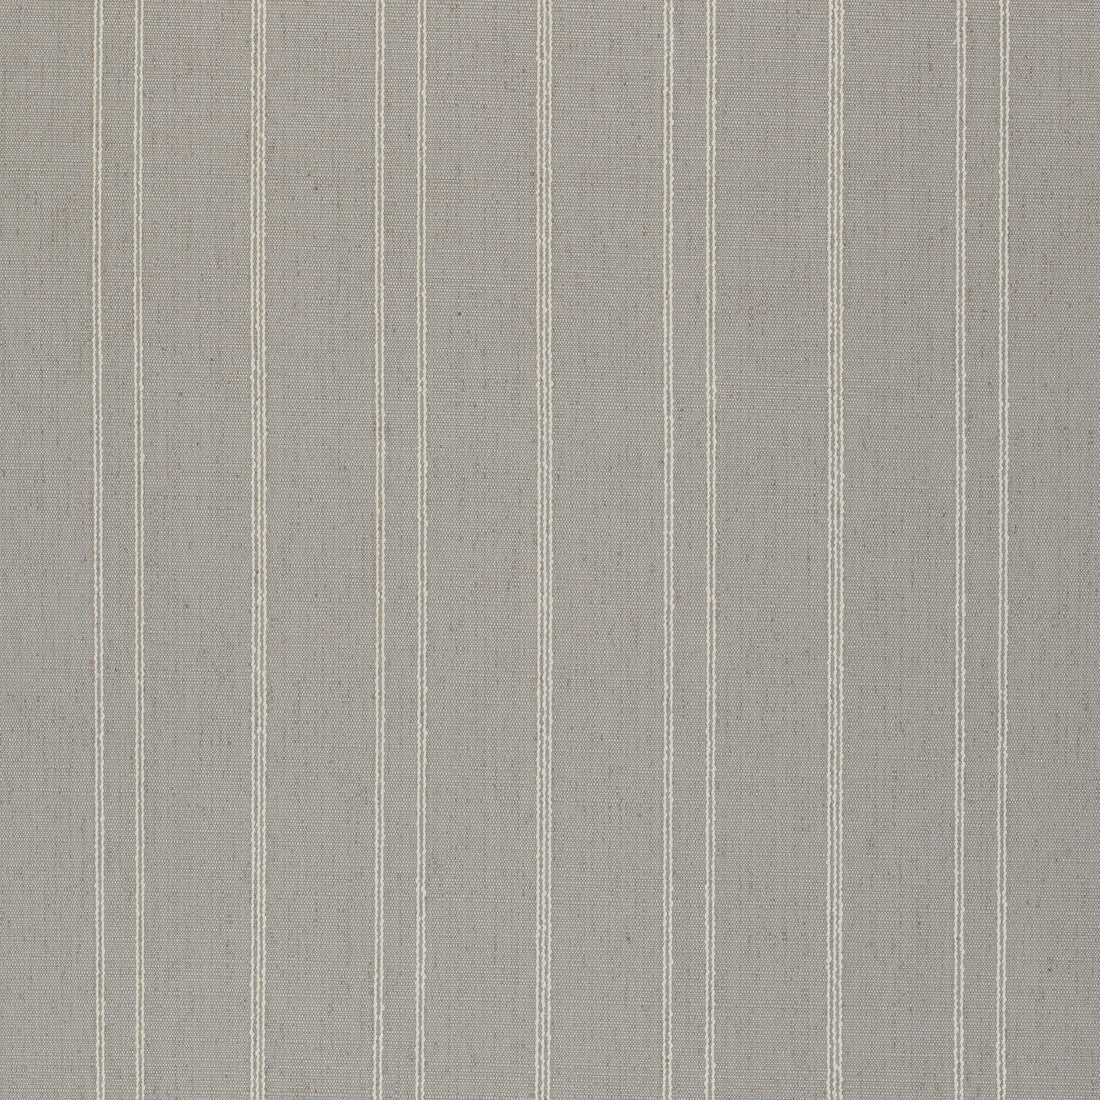 Nolan Stripe fabric in grey color - pattern number W73311 - by Thibaut in the Nomad collection